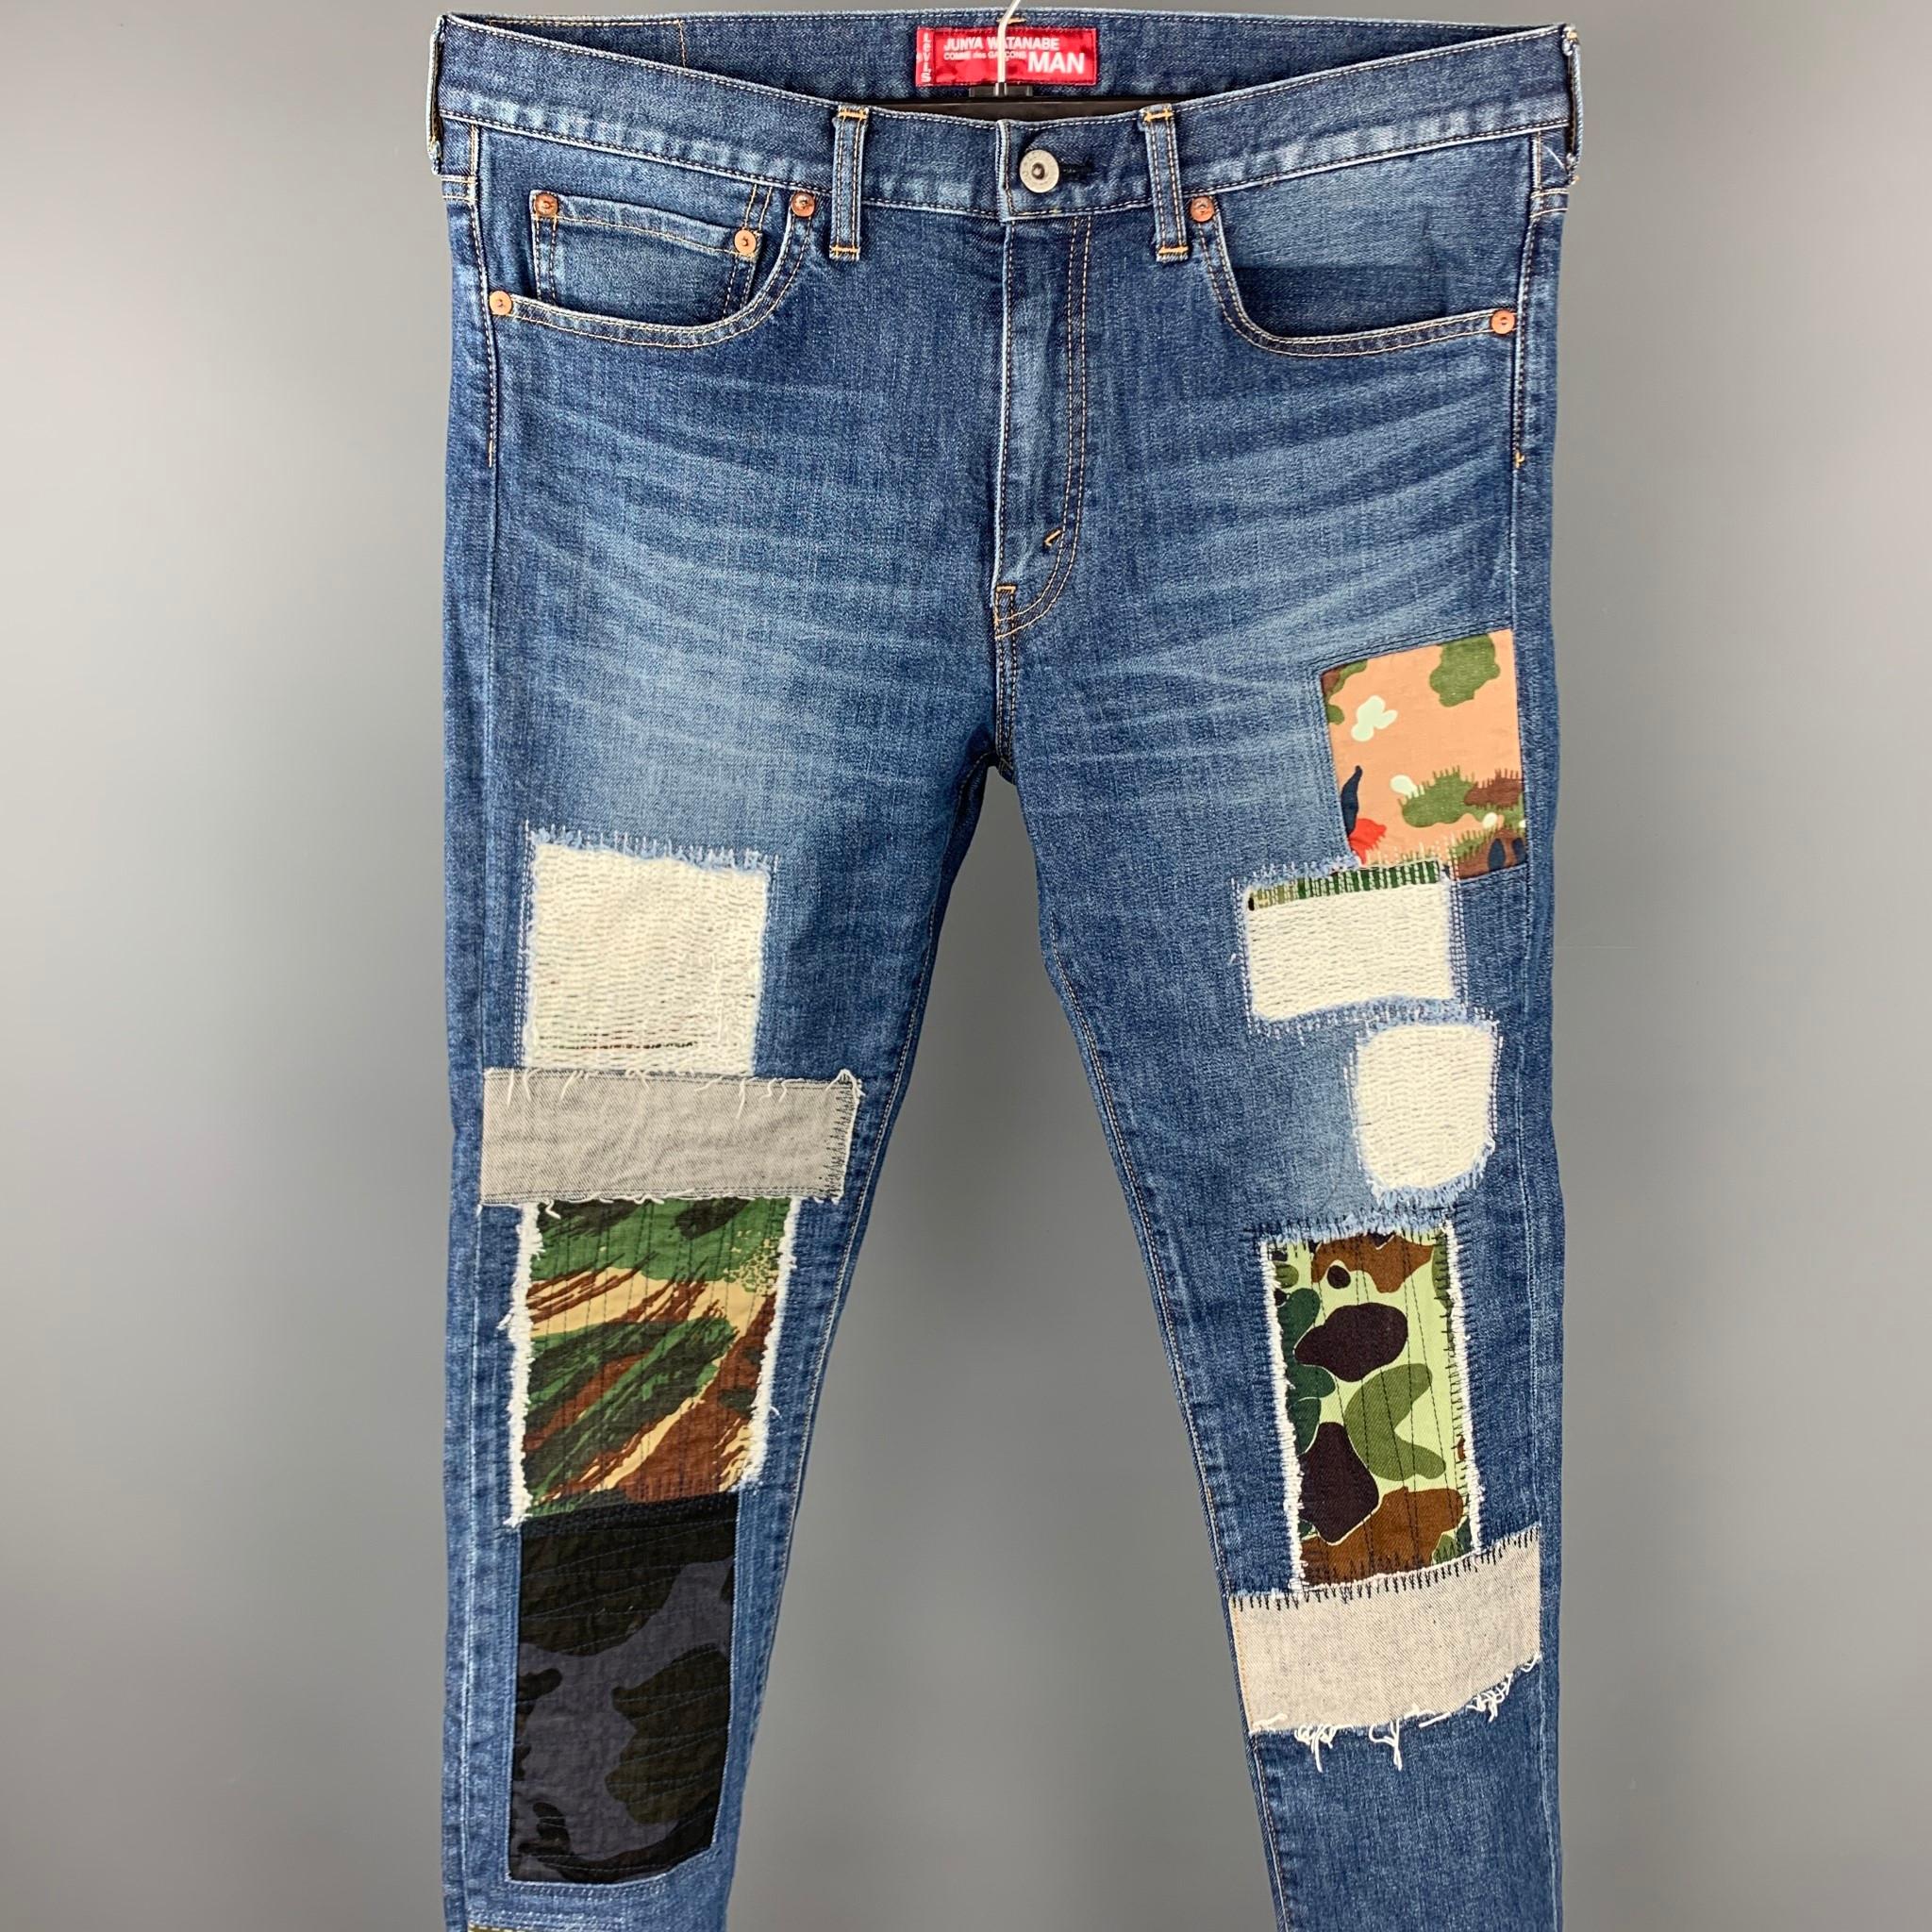 JUNYA WATANABE jeans comes in a indigo denim with patchwork details featuring a slim fit, contrast stitching, and a zip fly closure. Made in Japan.

Very Good Pre-Owned Condition.
Marked: L / AD 2018

Measurements:

Waist: 36 in.
Rise:9.5 in.